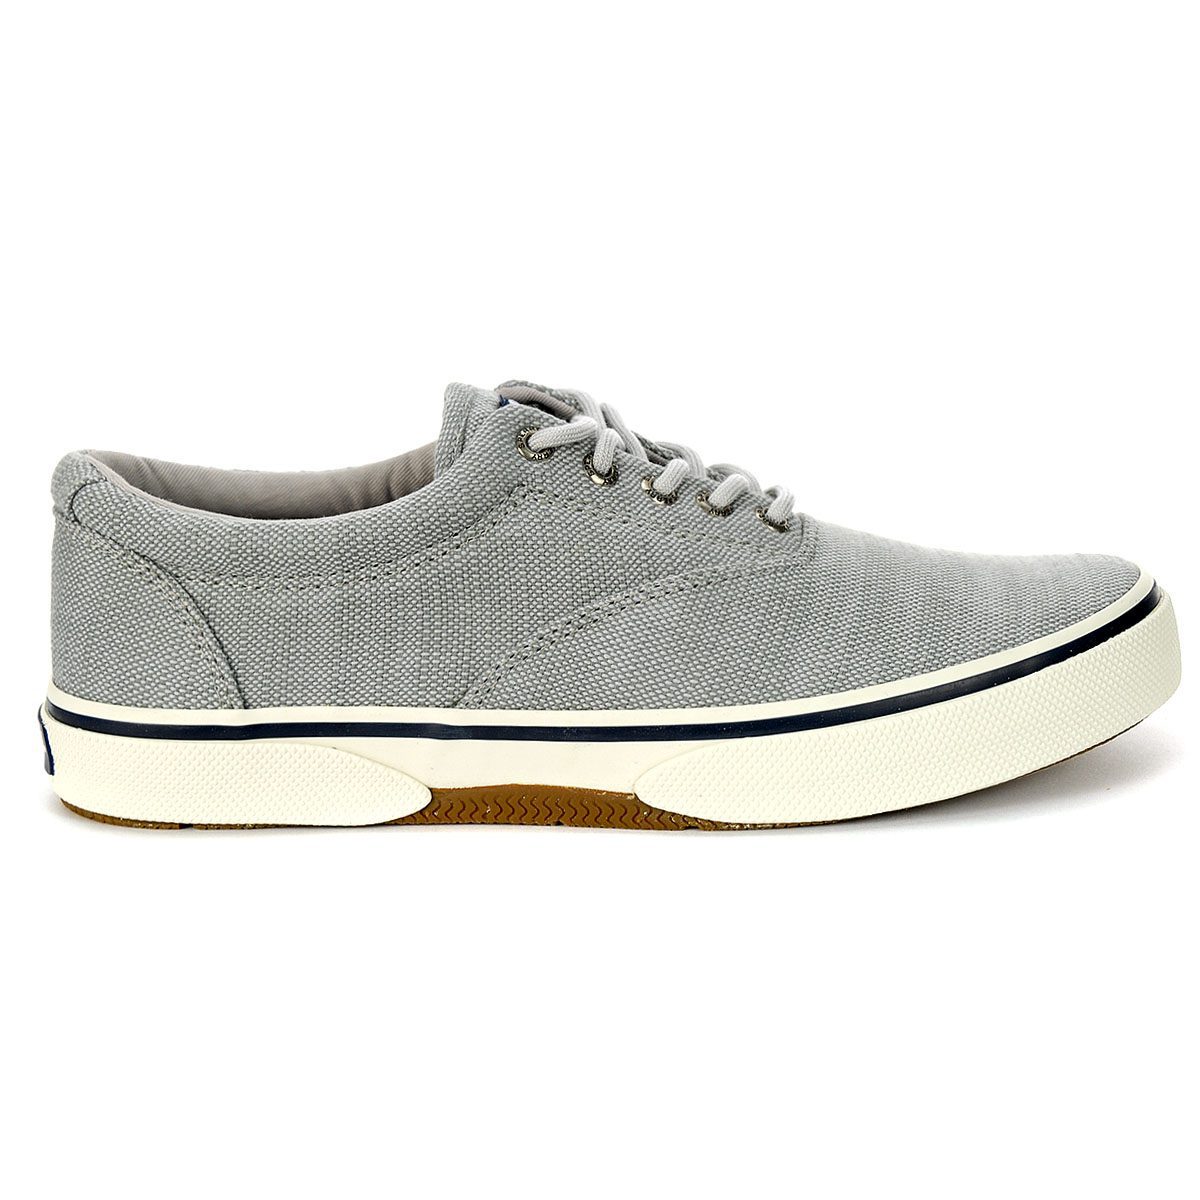 grey sperry top sider